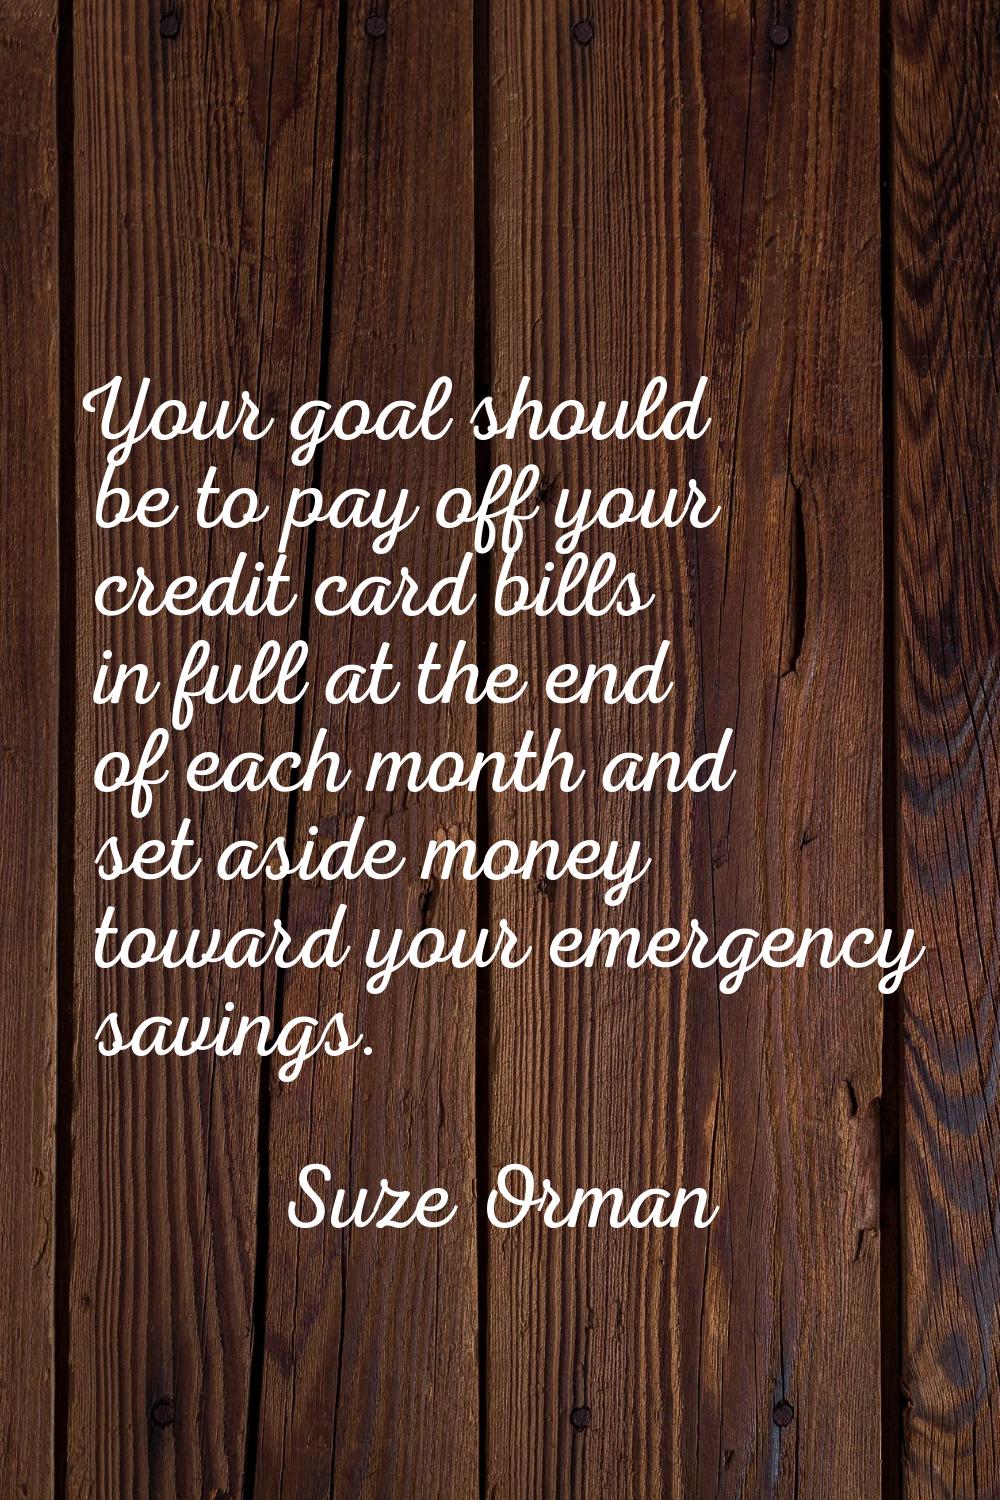 Your goal should be to pay off your credit card bills in full at the end of each month and set asid